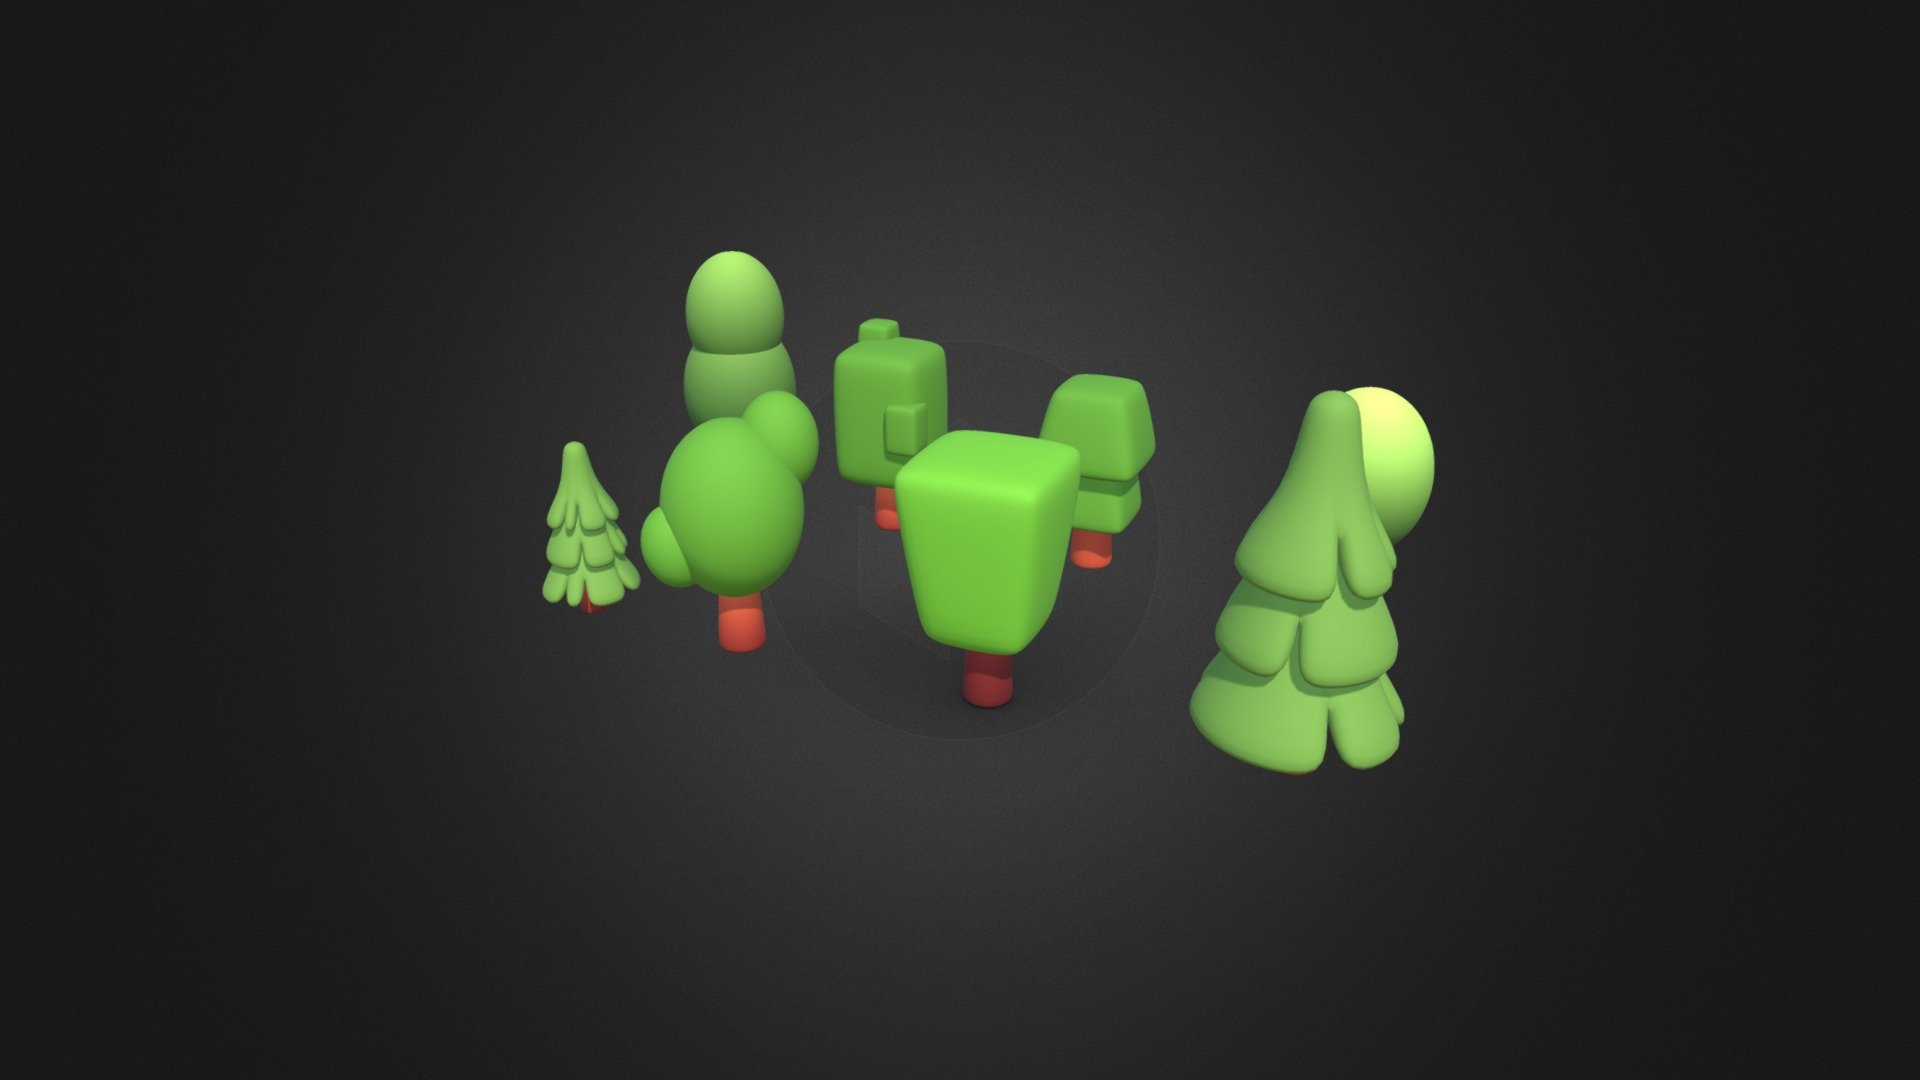 This pack contains 8 cute and stylized 3D tree models.

All packaged into a ZIP file; just extract and you can then import them into other 3D software or game engines of your choice 3d model